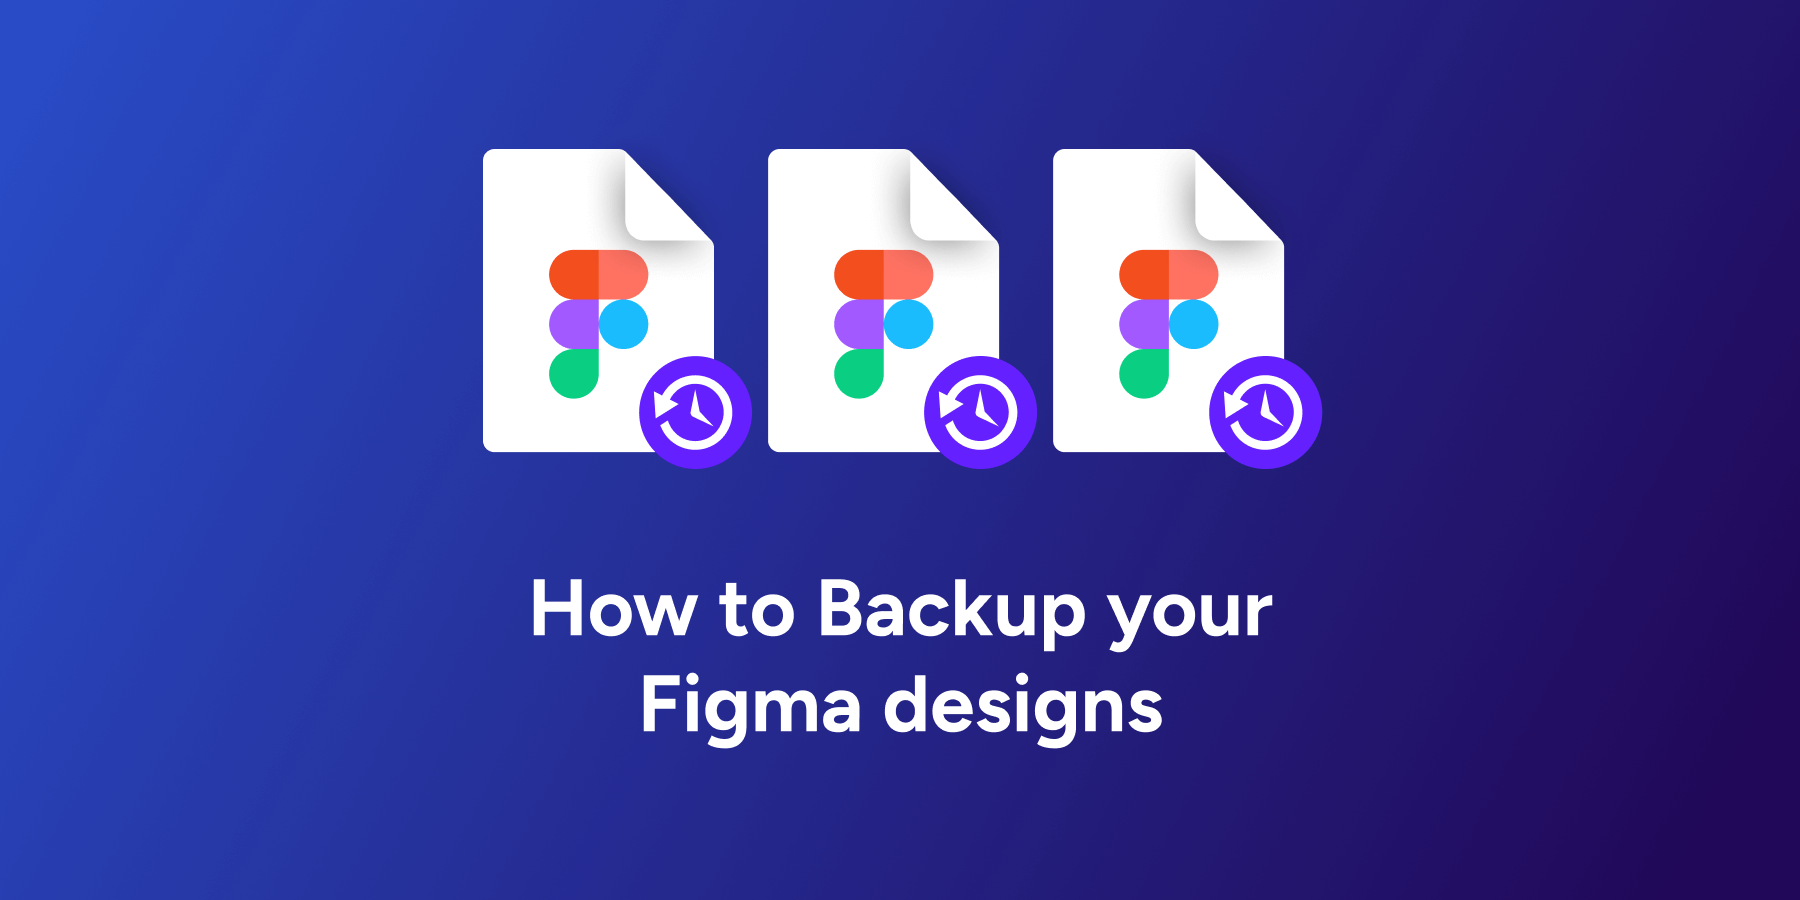 How to Backup your Figma designs